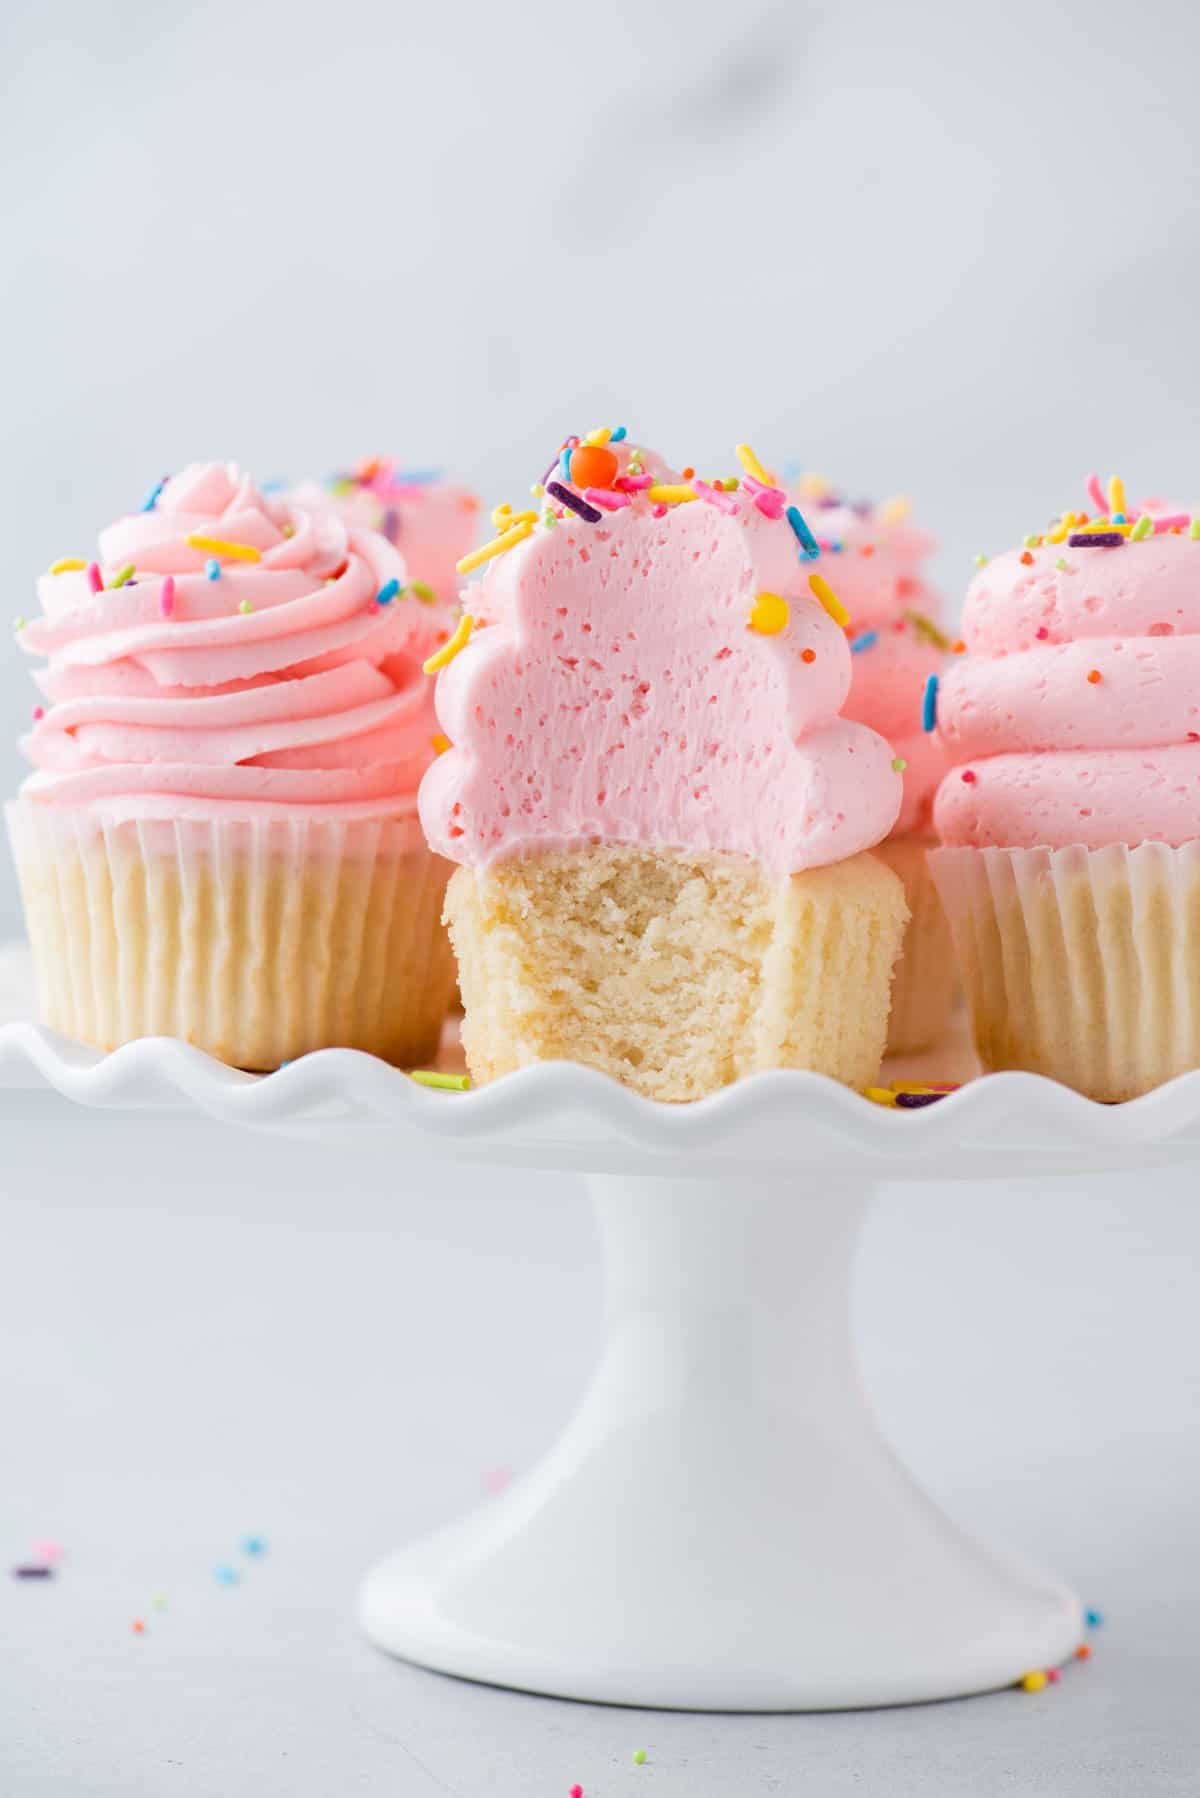 Gluten-free cupcakes on cake stand, with one cut to show light, fluffy cake texture